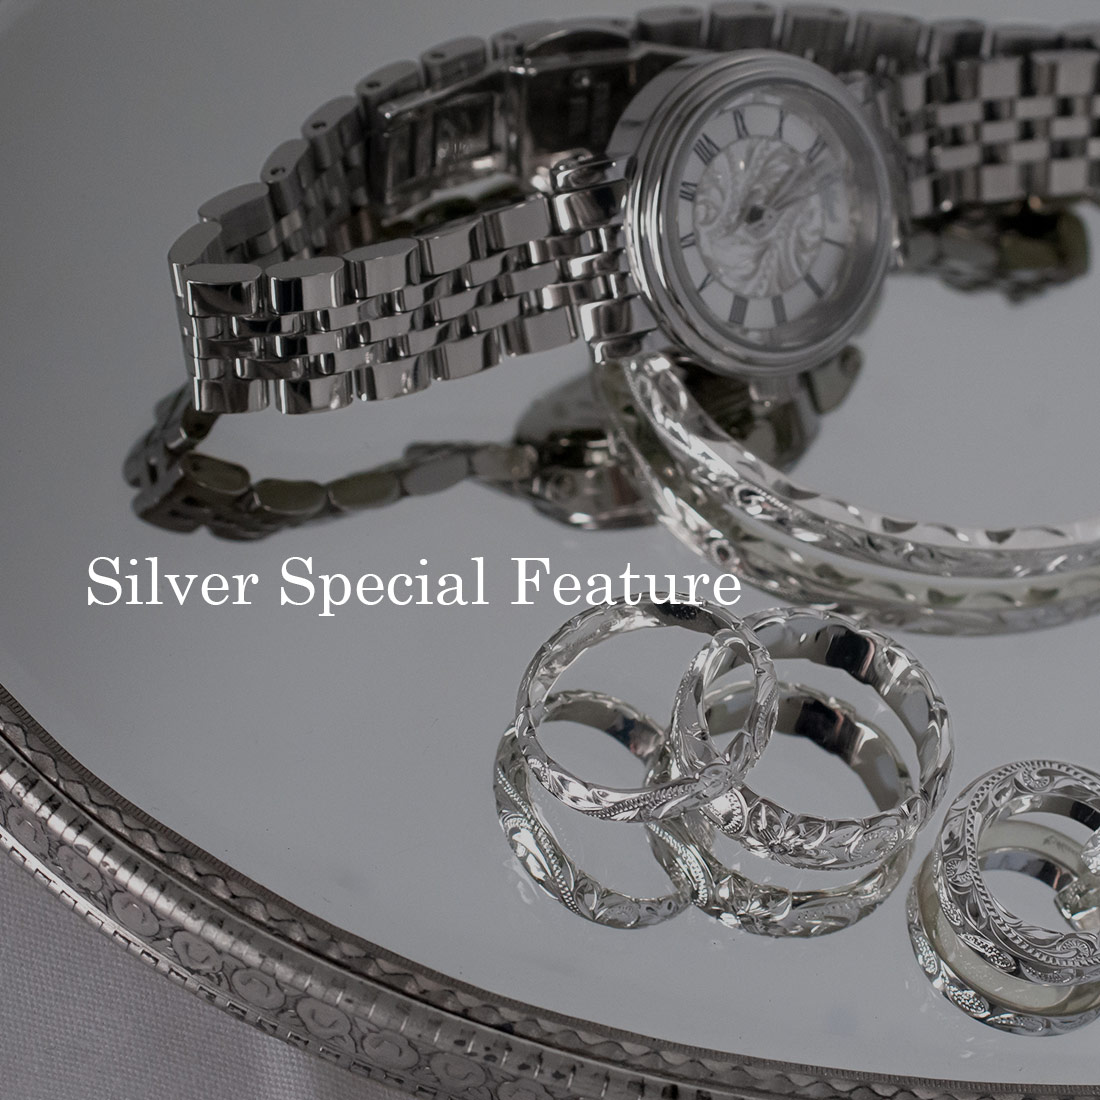 Silver Special Feature